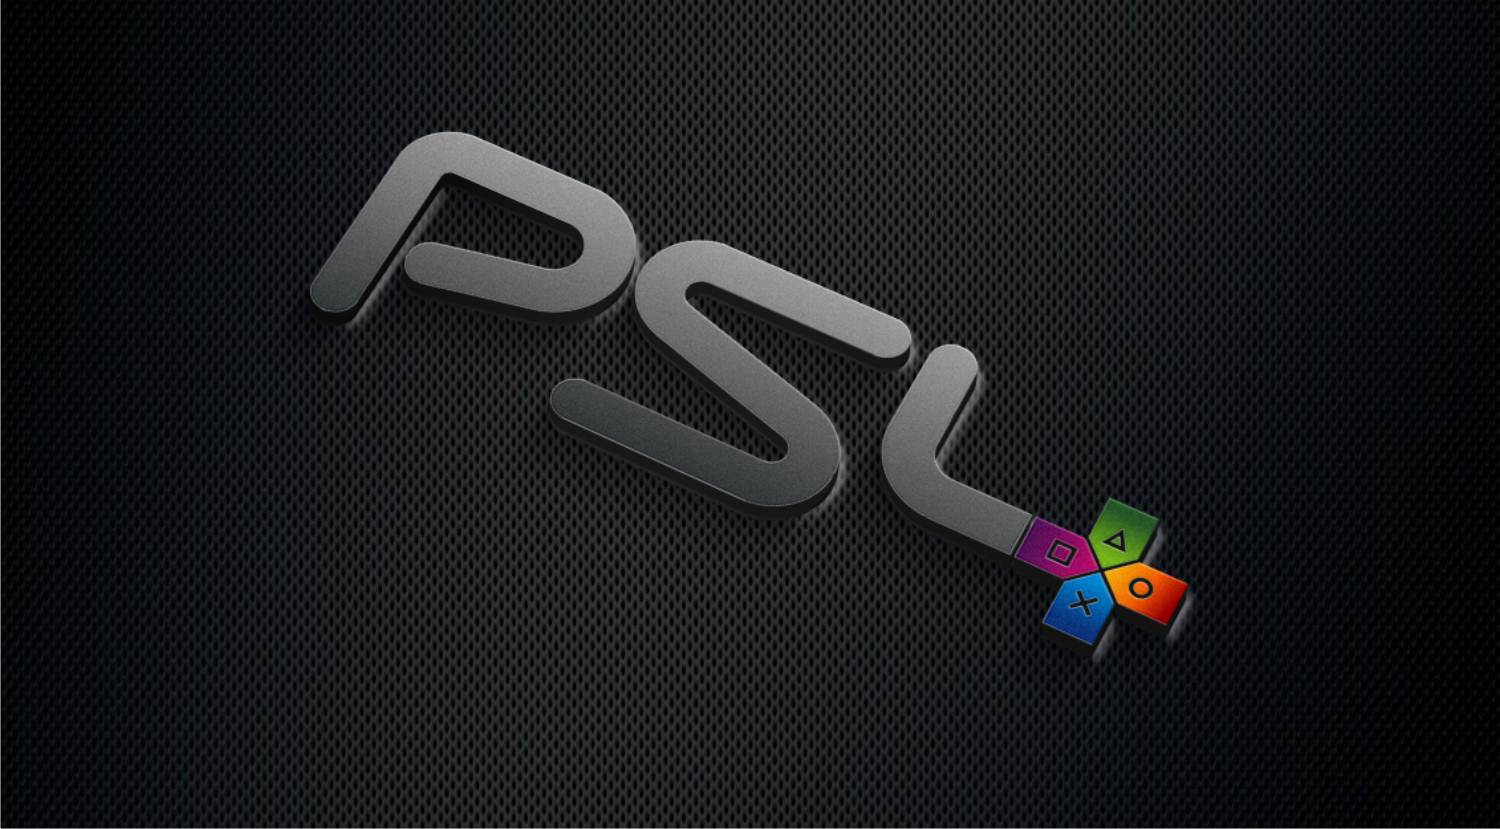 Sony PlayStation 4 Logo - 10 Amazing PS4 Logo Concepts That Sony Could Draw Inspiration From